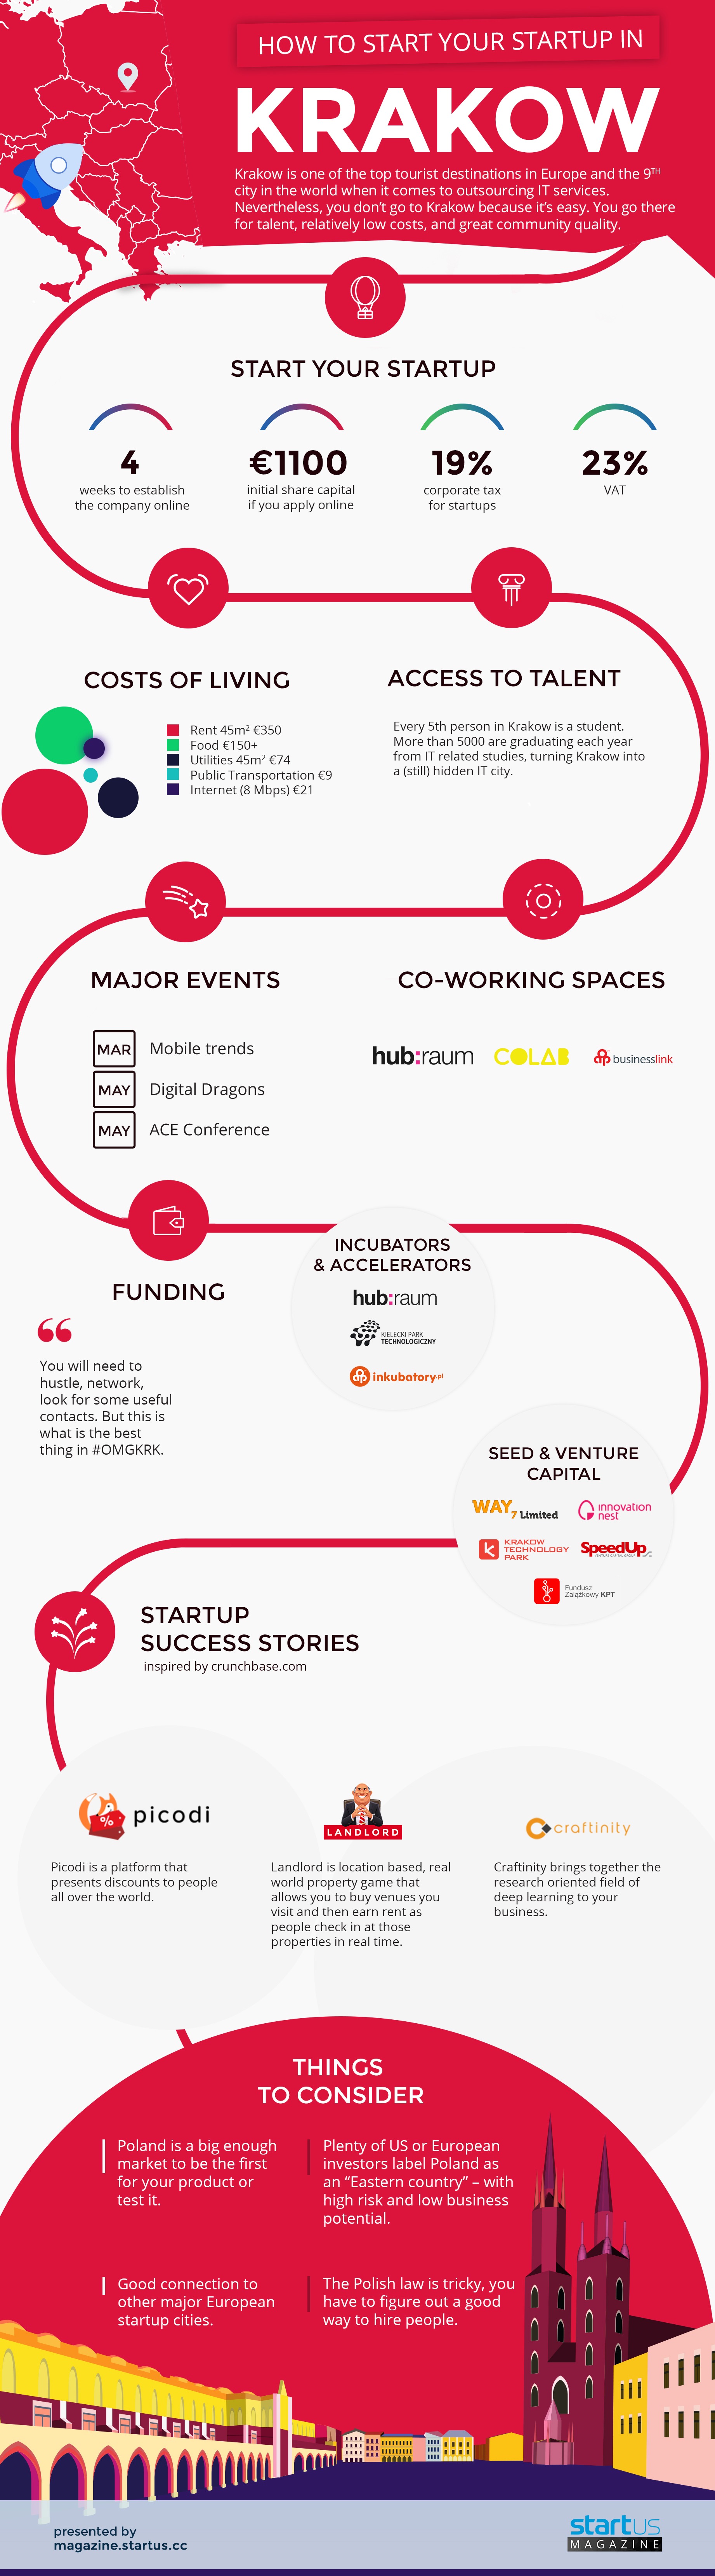 Infographic: How To Start Your Startup In Krakow